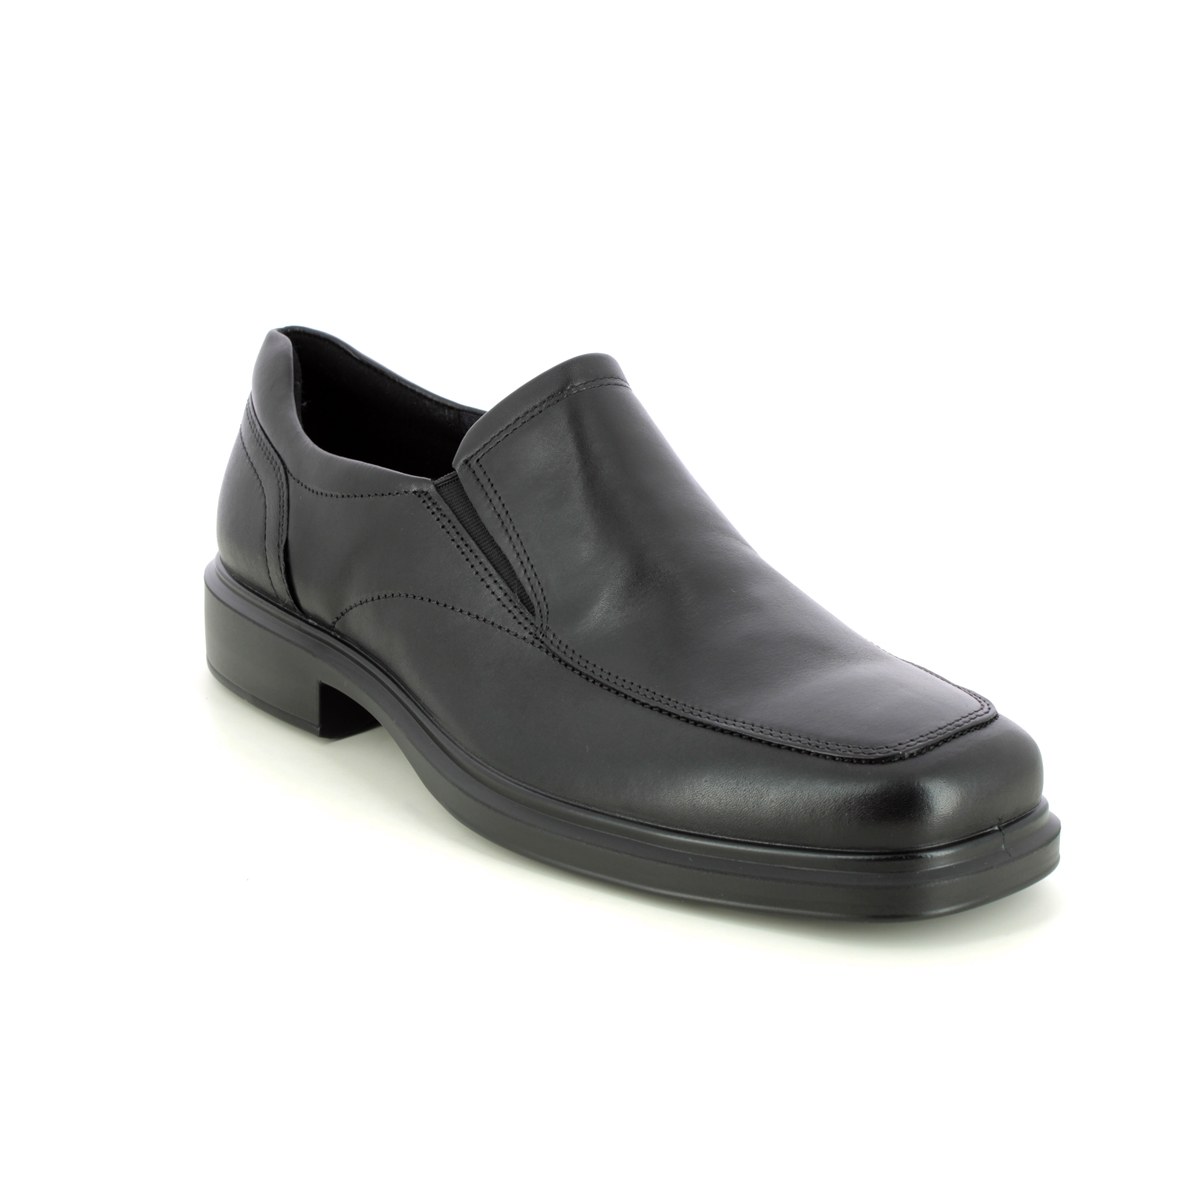 ECCO Helsinki 2 Slip Black leather Mens Slip-on Shoes 500154-01001 in a Plain Leather in Size 48